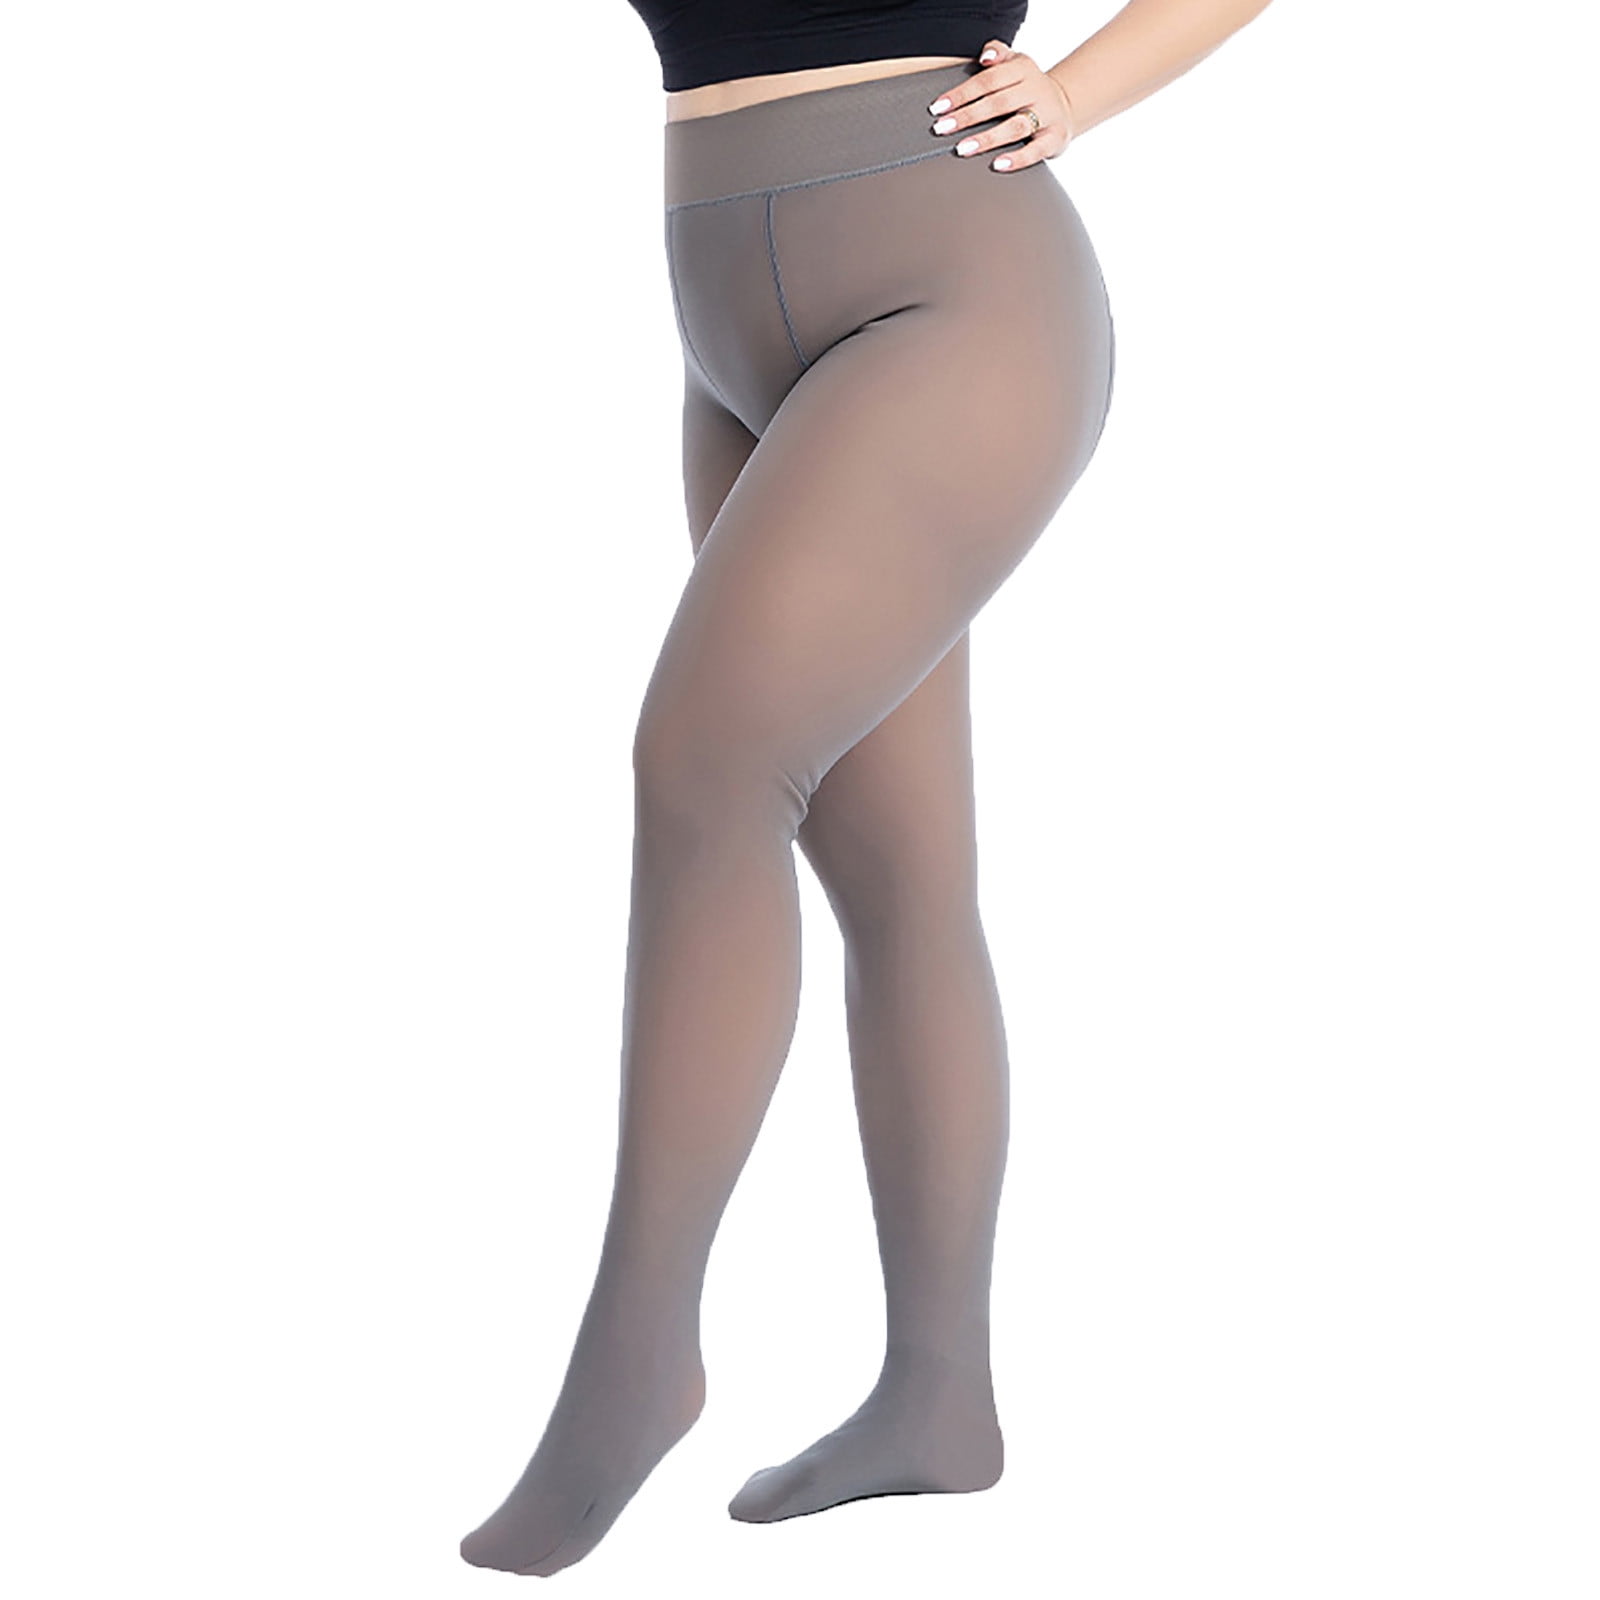 Women's Plus Size Leggings Warm Fleece Lined Pantyhose High Waist Slim  Stretchy Tights for Winter Match with Dress Coffee 320g Stockings